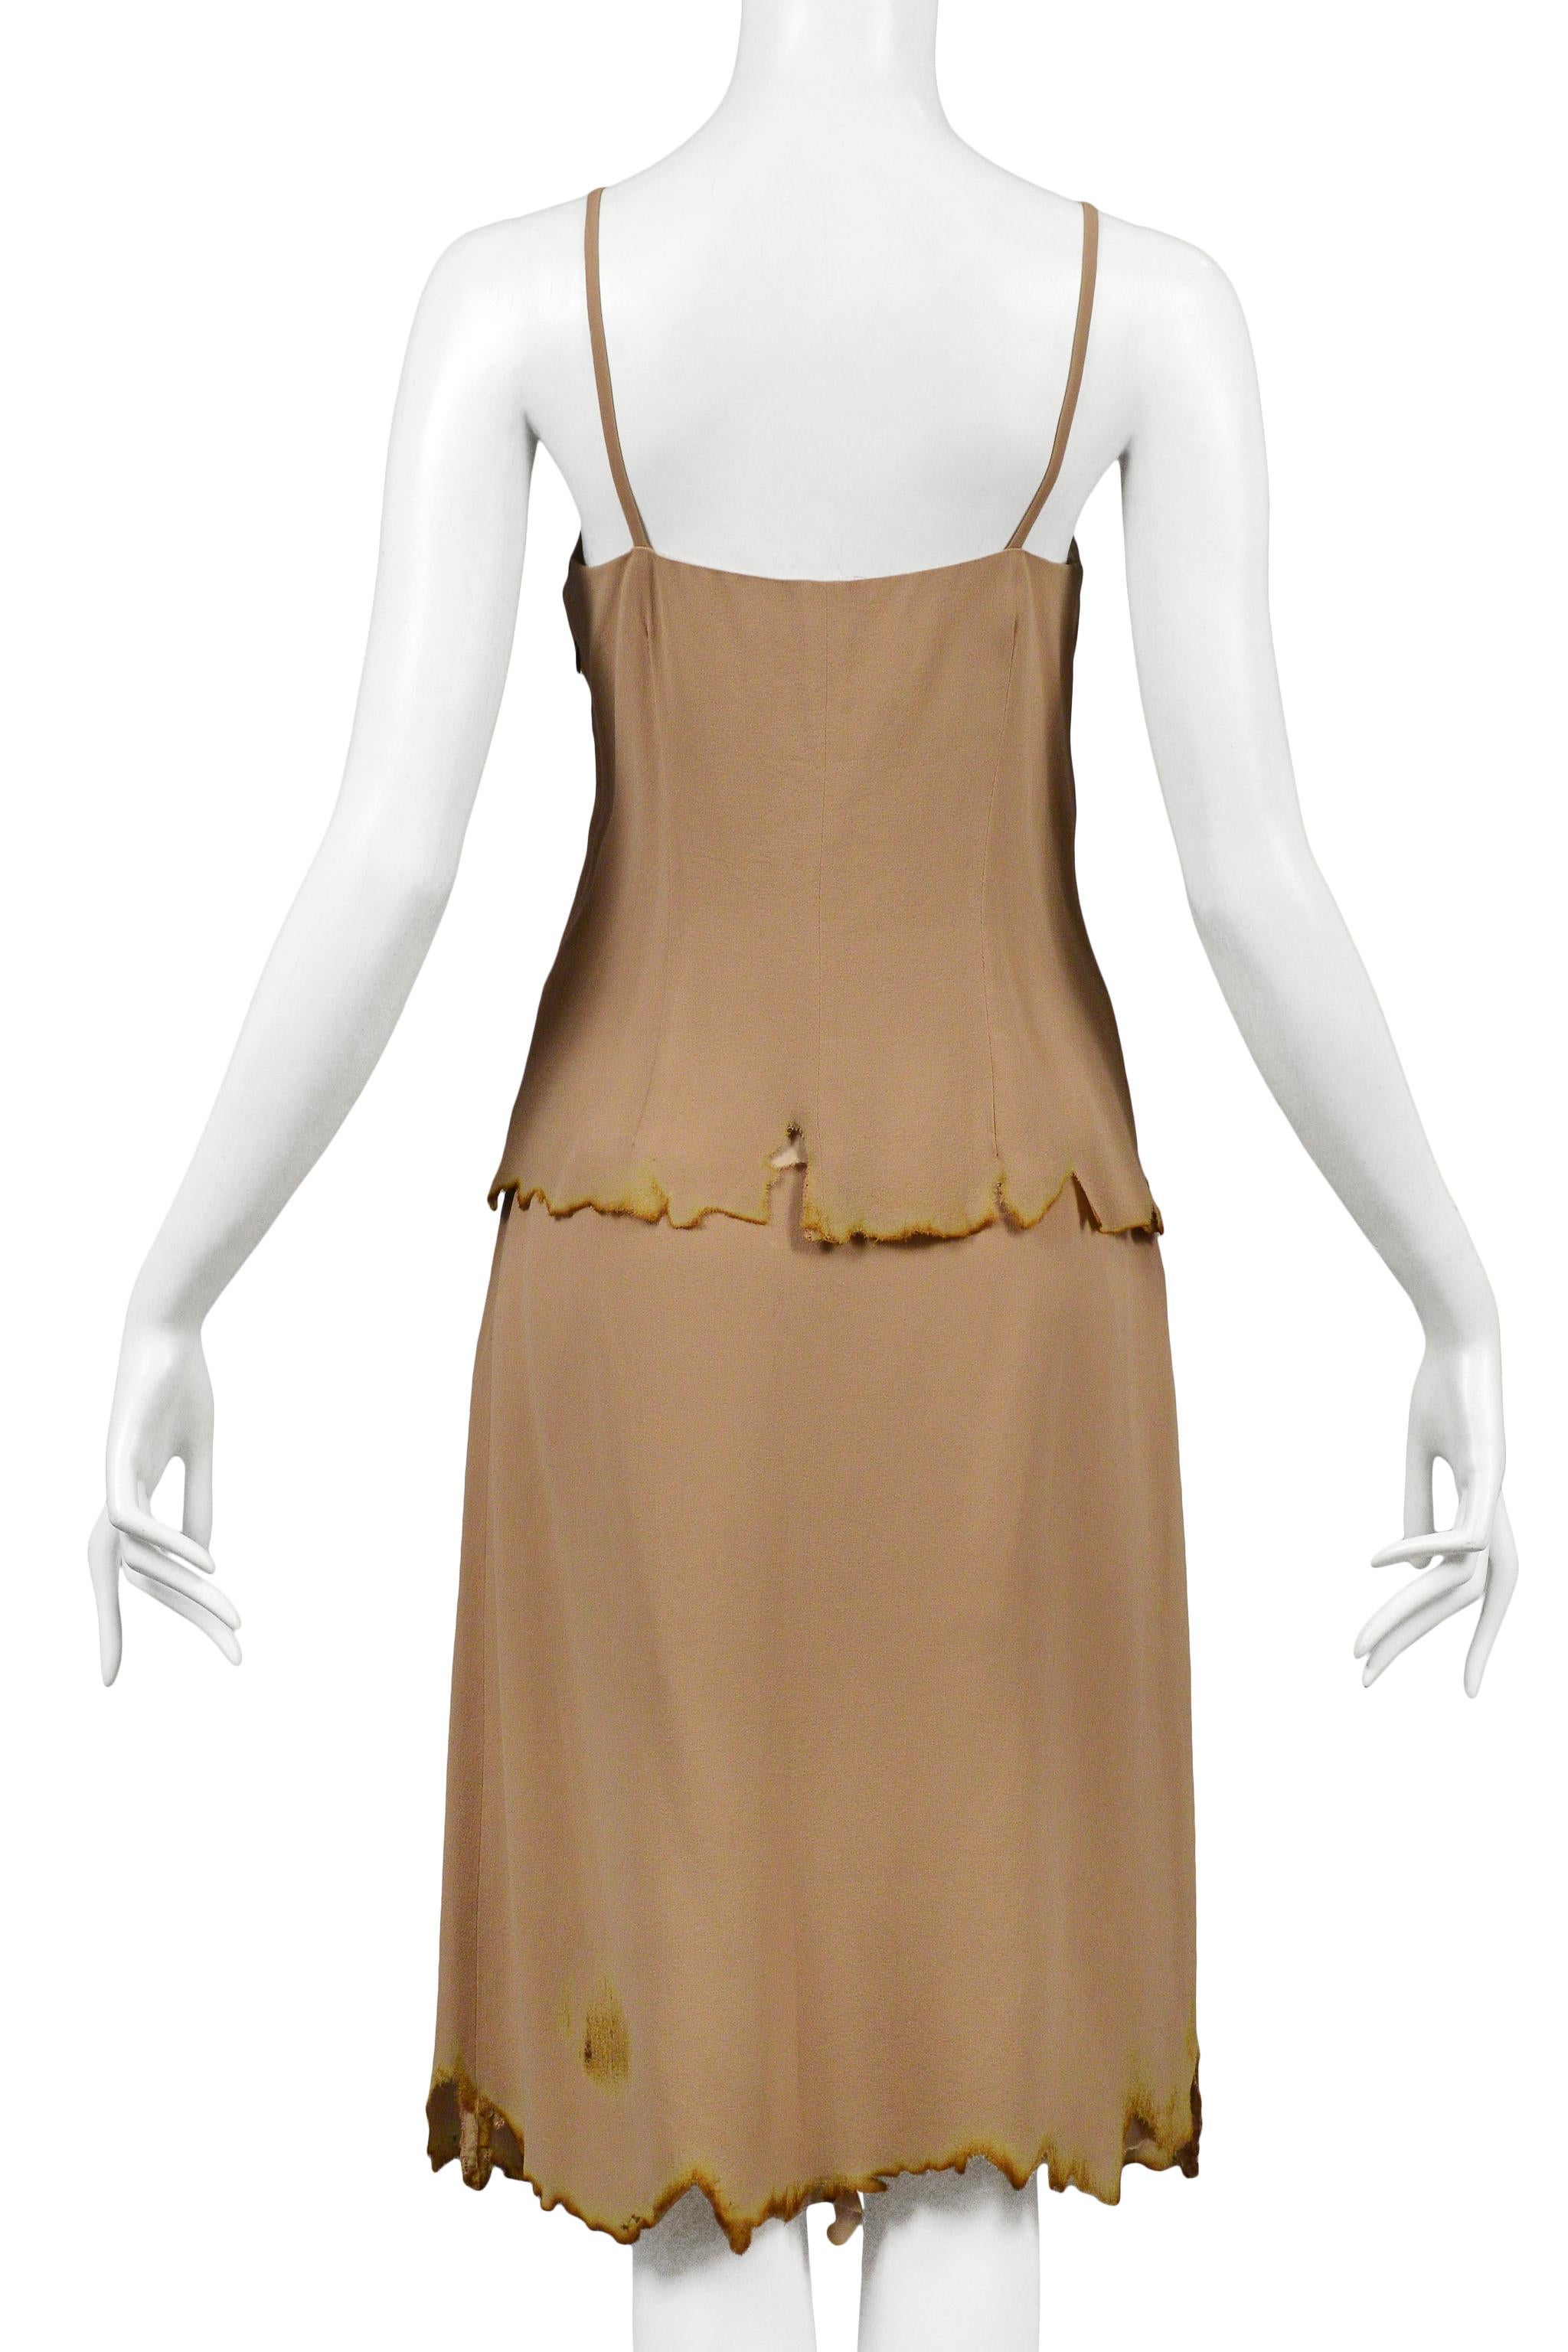 Maison Martin Margiela Nude Burnt Edged Top and Skirt Ensemble 2003 In Excellent Condition For Sale In Los Angeles, CA